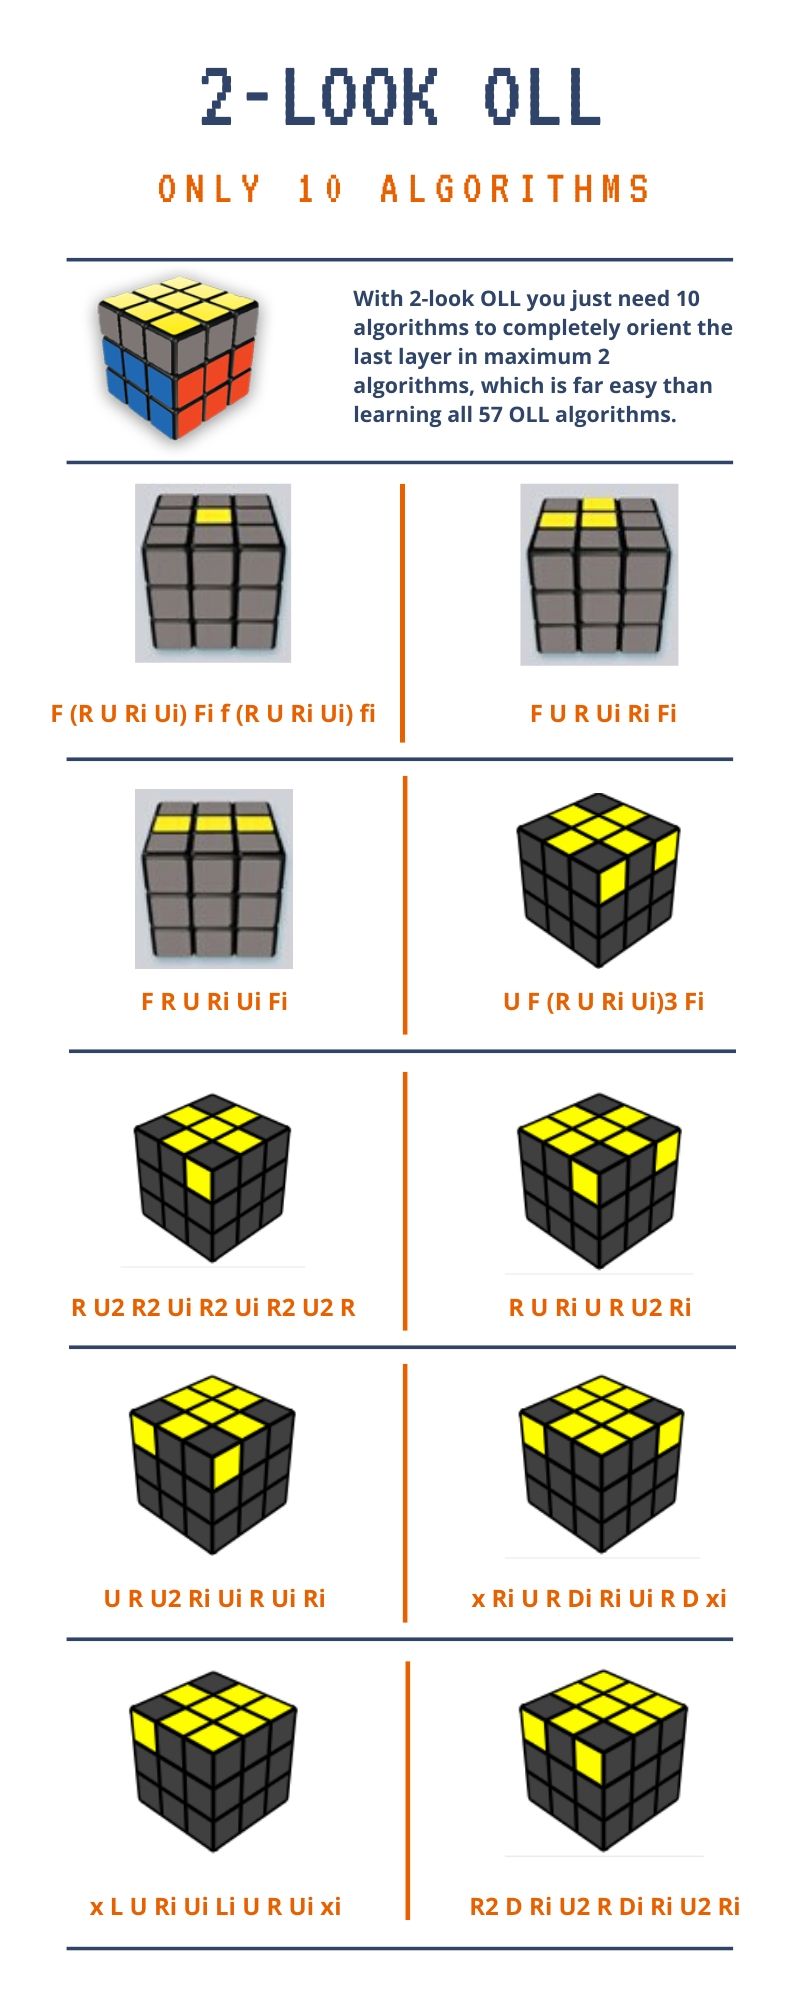 2-look oll, how to solve a rubik's cube